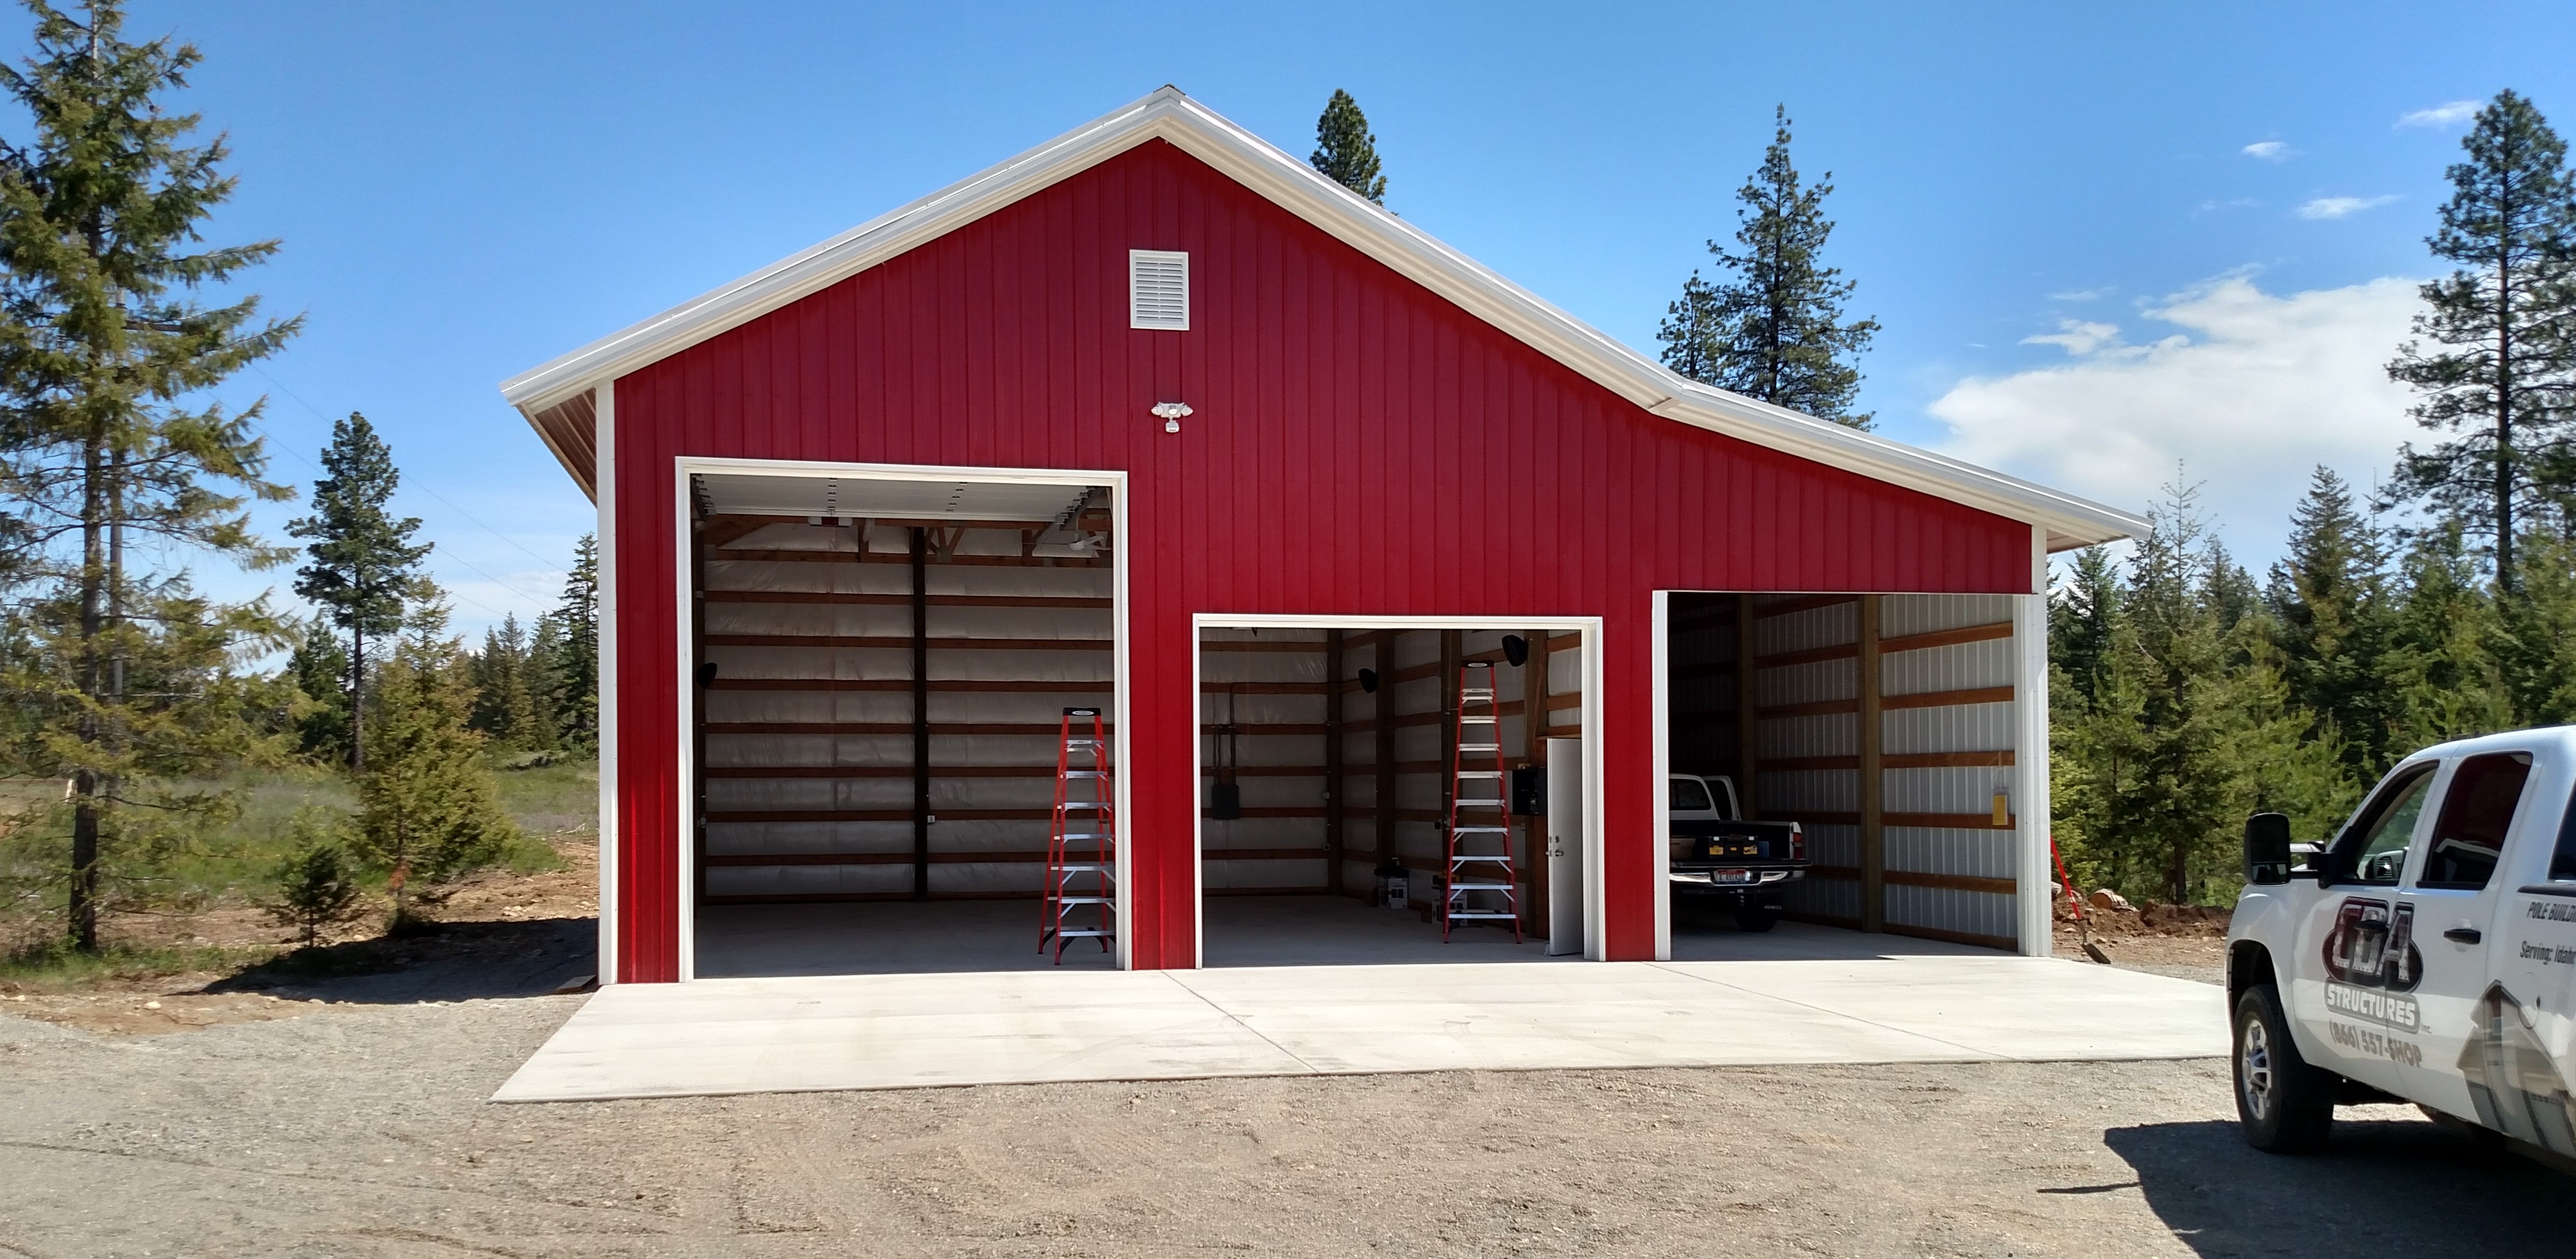 Unique 15 of Steel Garages And Shops